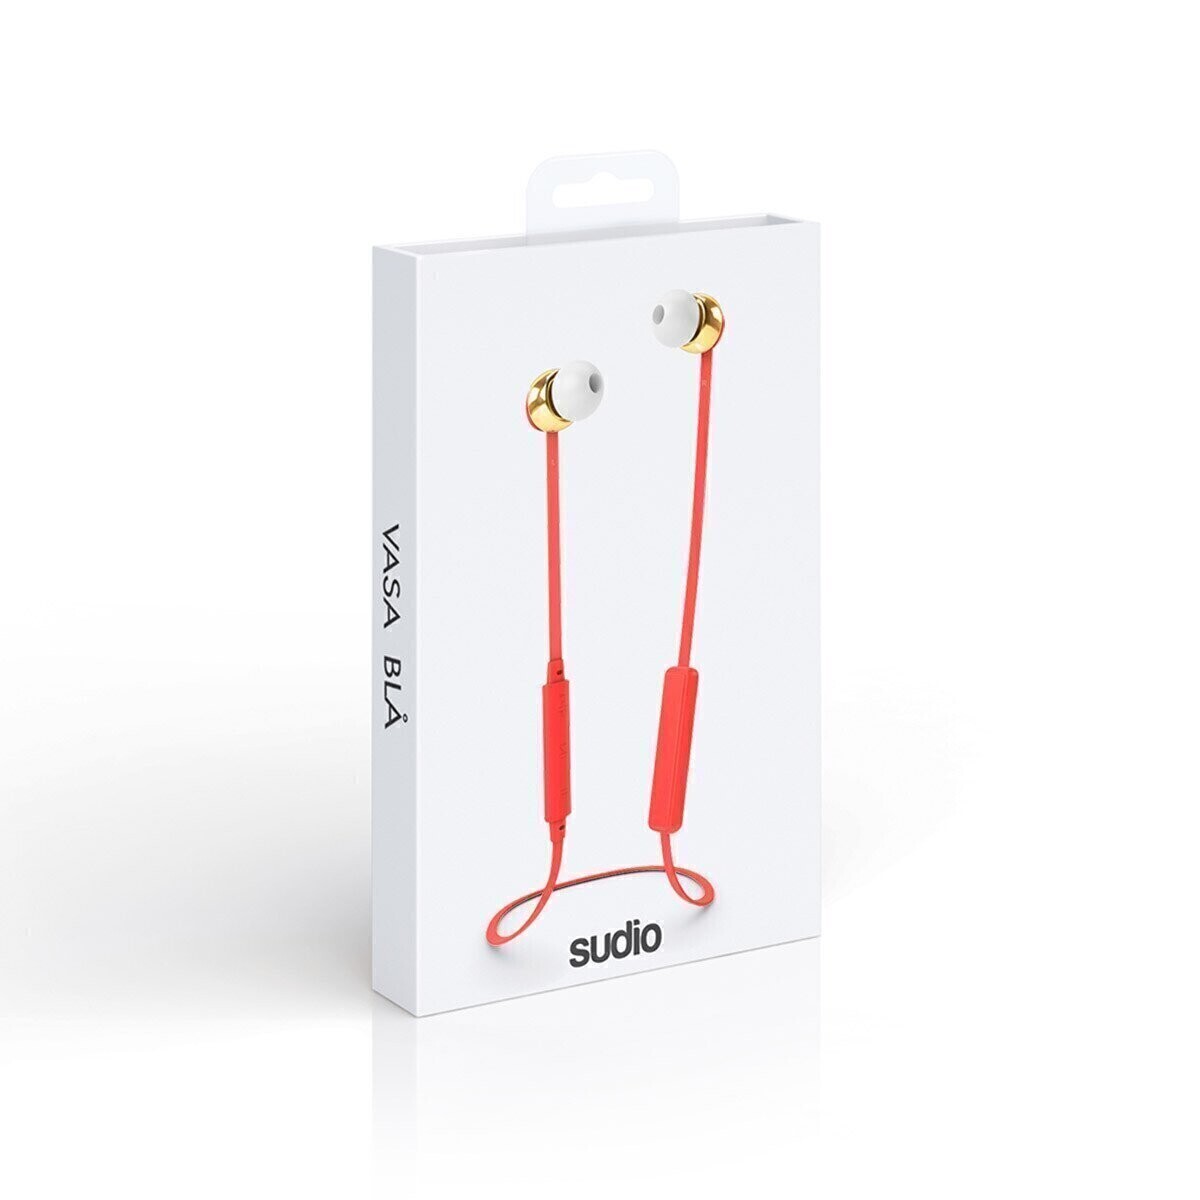 Sudio Vasa Bl√• Wireless Earphones with Charger, Coral (Limited Edition)